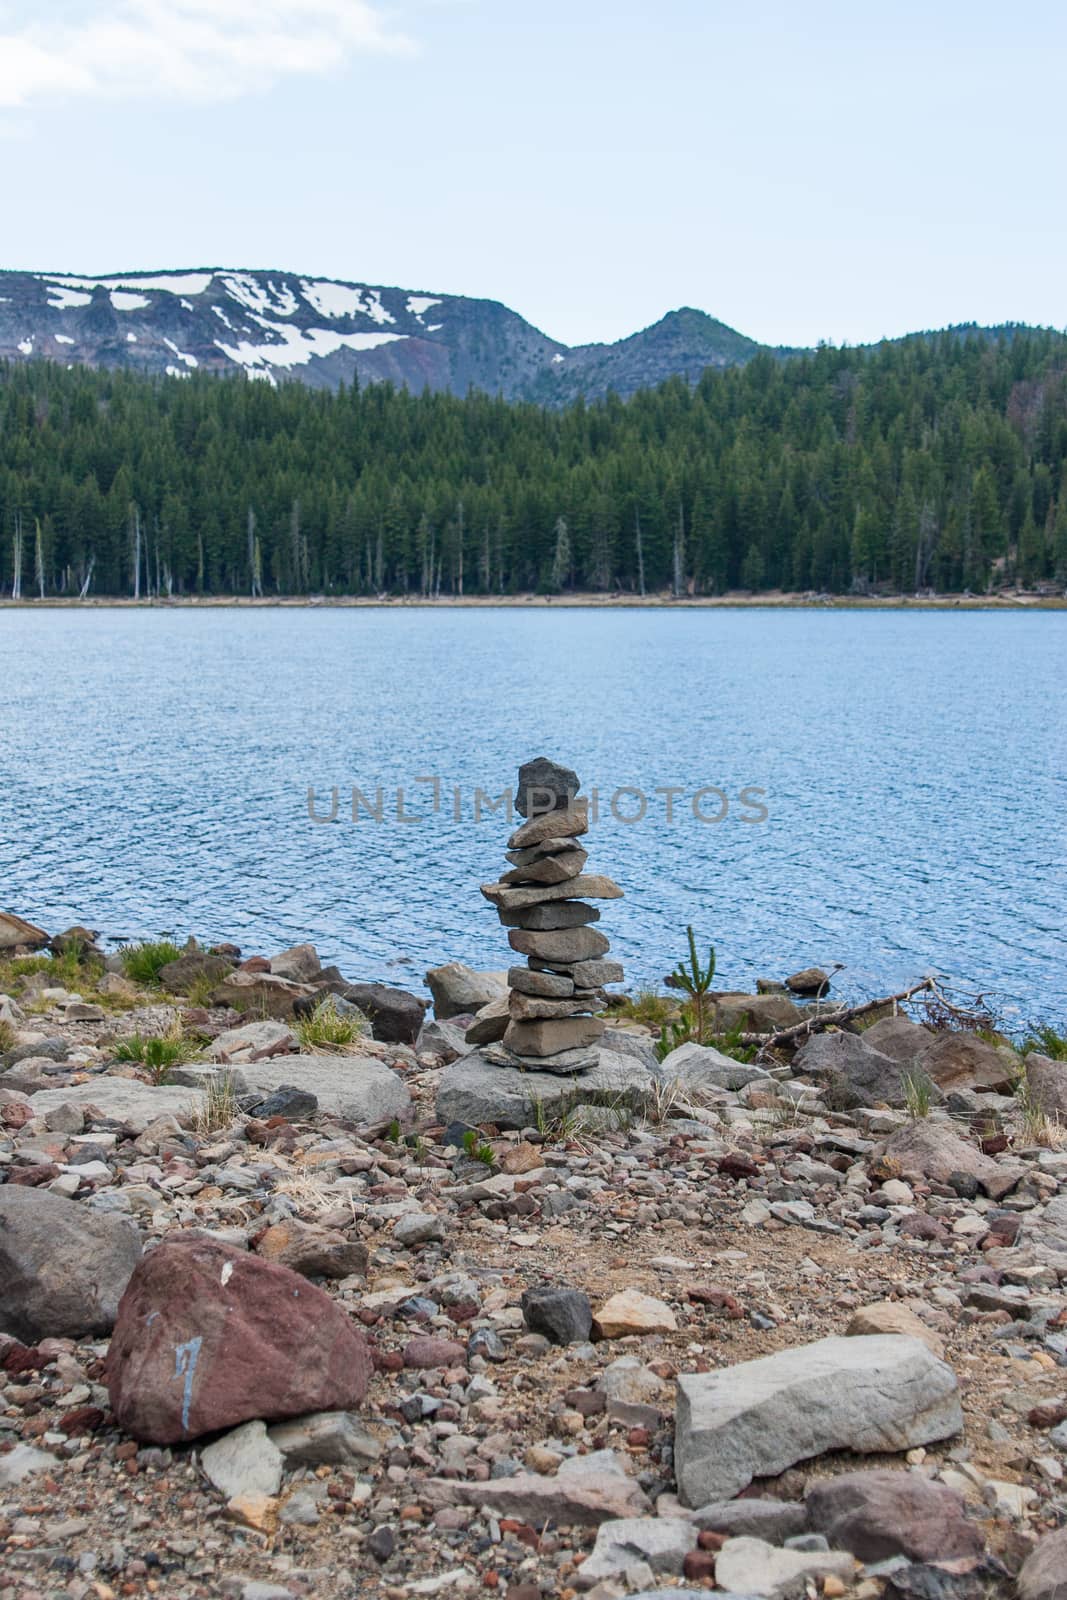 Small cairn on the shore of a lake